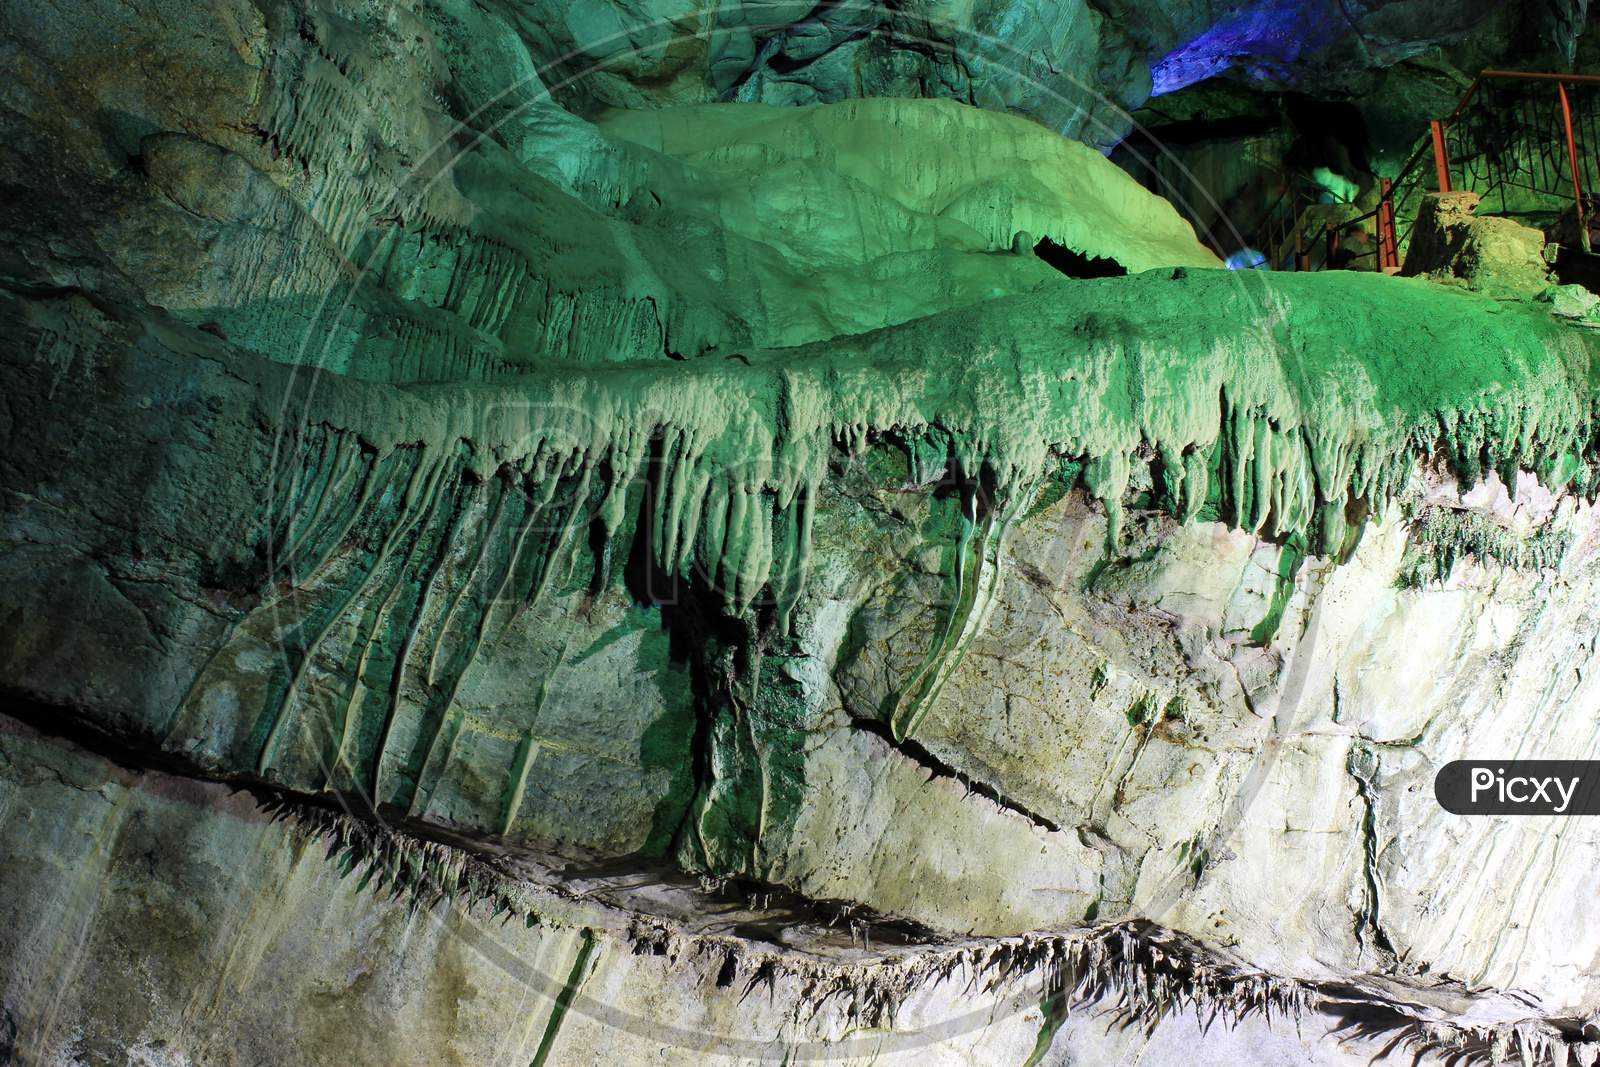 Stalactite and Stalagmite caves are located on the East coast of India, in the Ananthagiri hills of the Araku valley, Visakhapatnam in Andhra Pradesh, India.